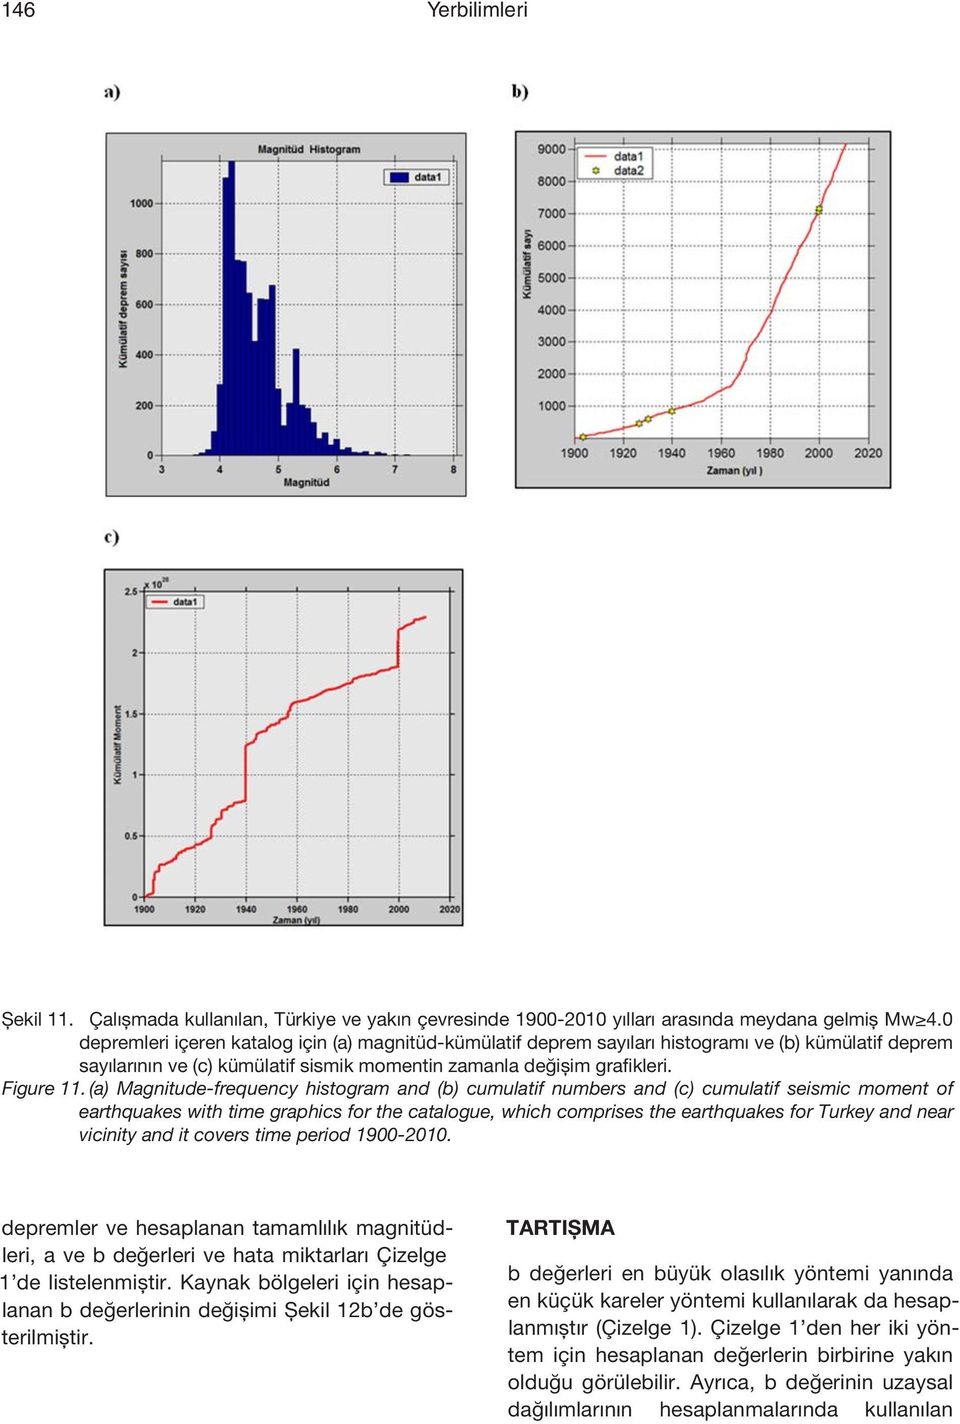 (a) Magnitude-frequency histogram and (b) cumulatif numbers and (c) cumulatif seismic moment of earthquakes with time graphics for the catalogue, which comprises the earthquakes for Turkey and near